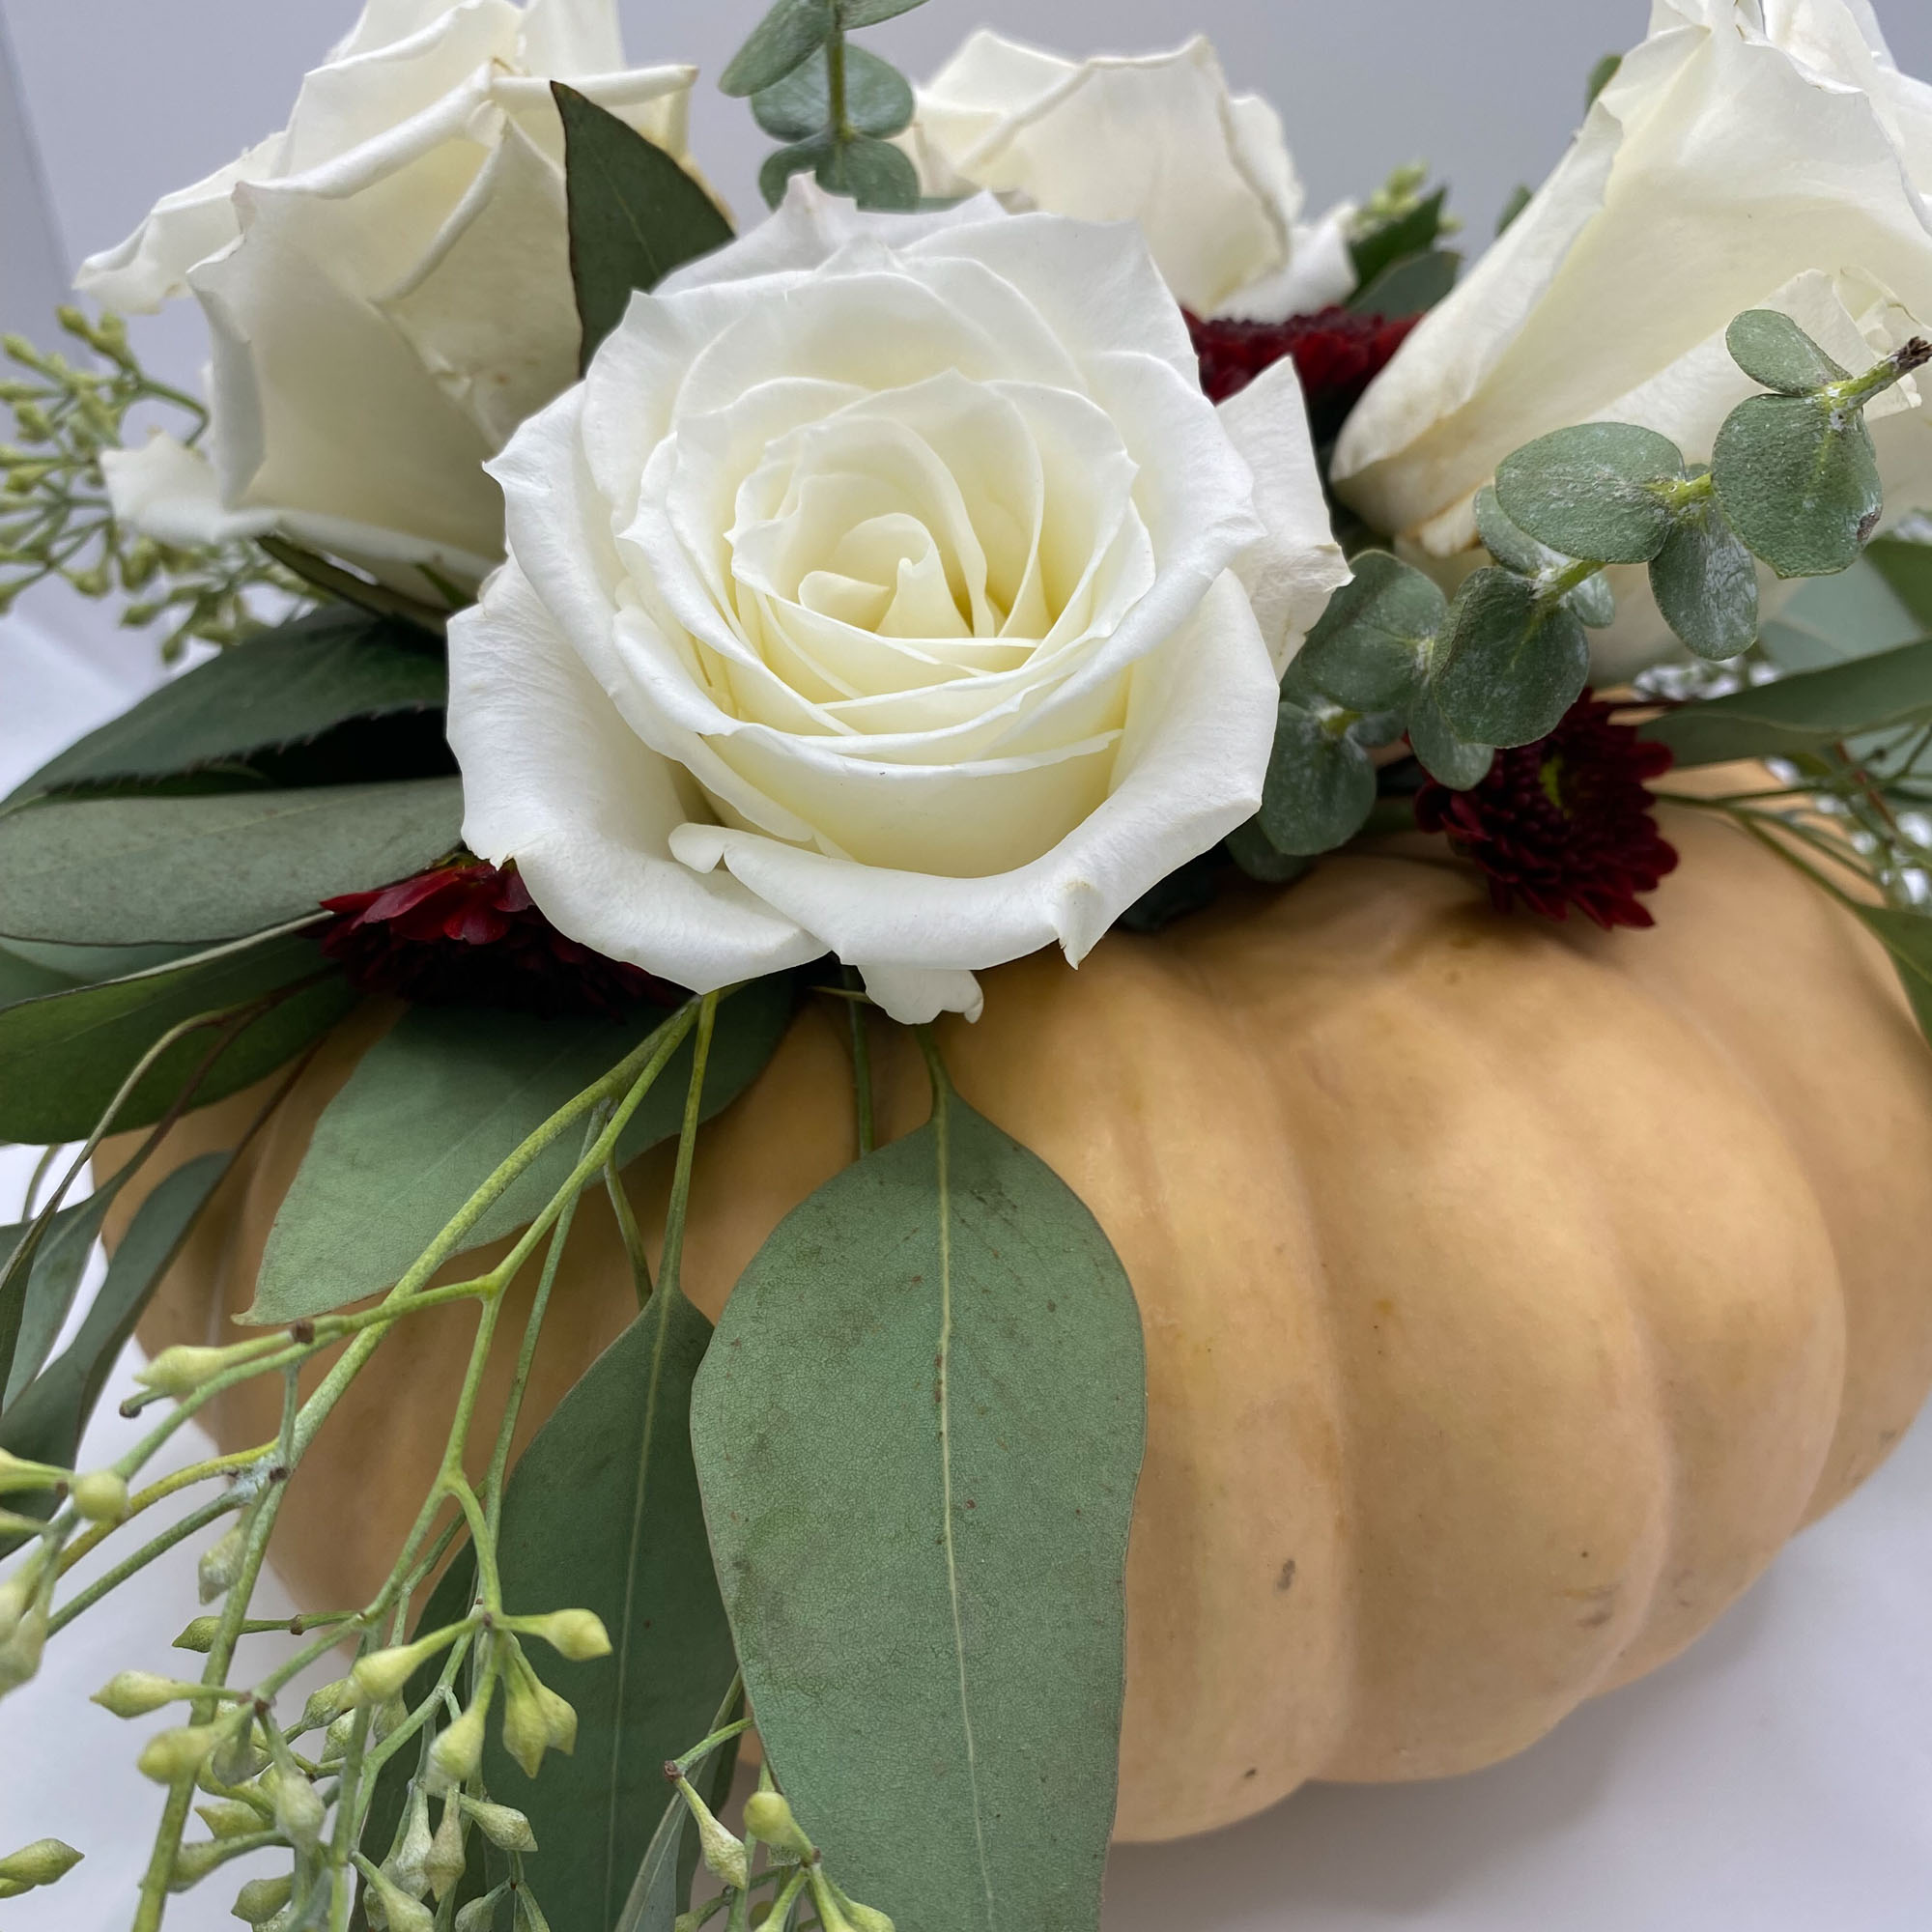 Floral arrangement in a tan pumpkin, with white roses and burgundy flowers.